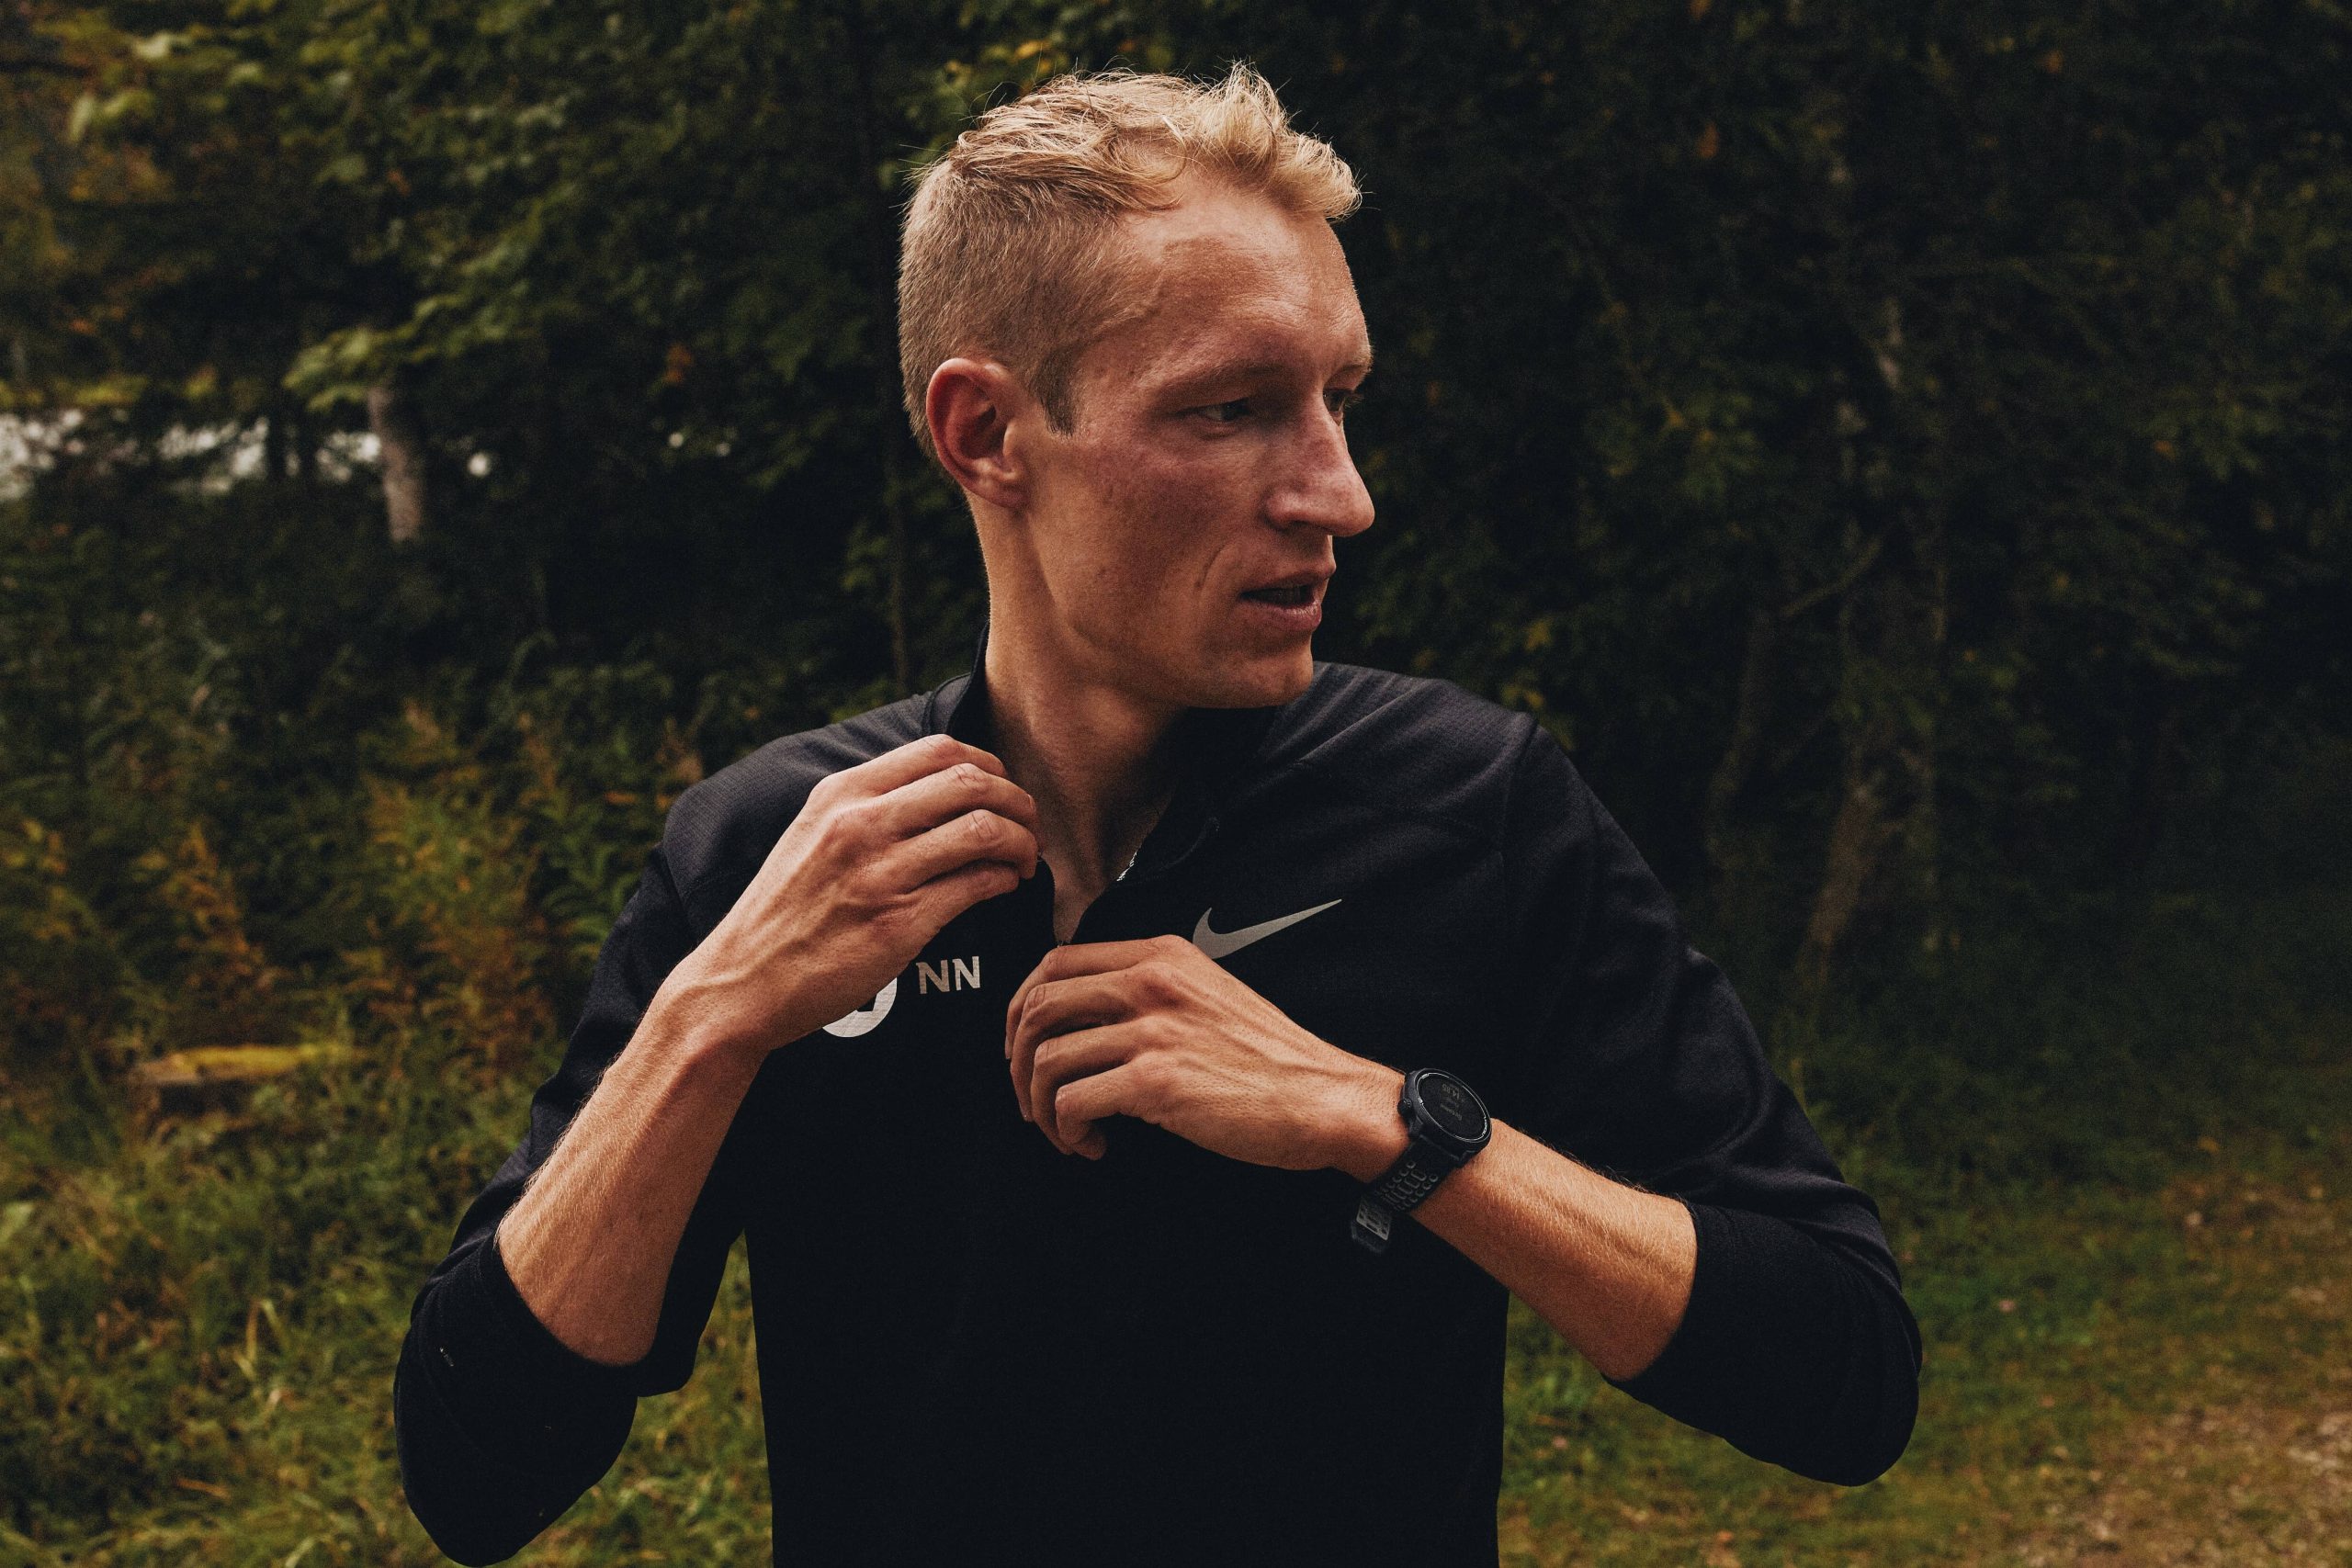 Björn Koreman, marathon runner, wearing a black Nike top looking away from the camera with a sports watch on.